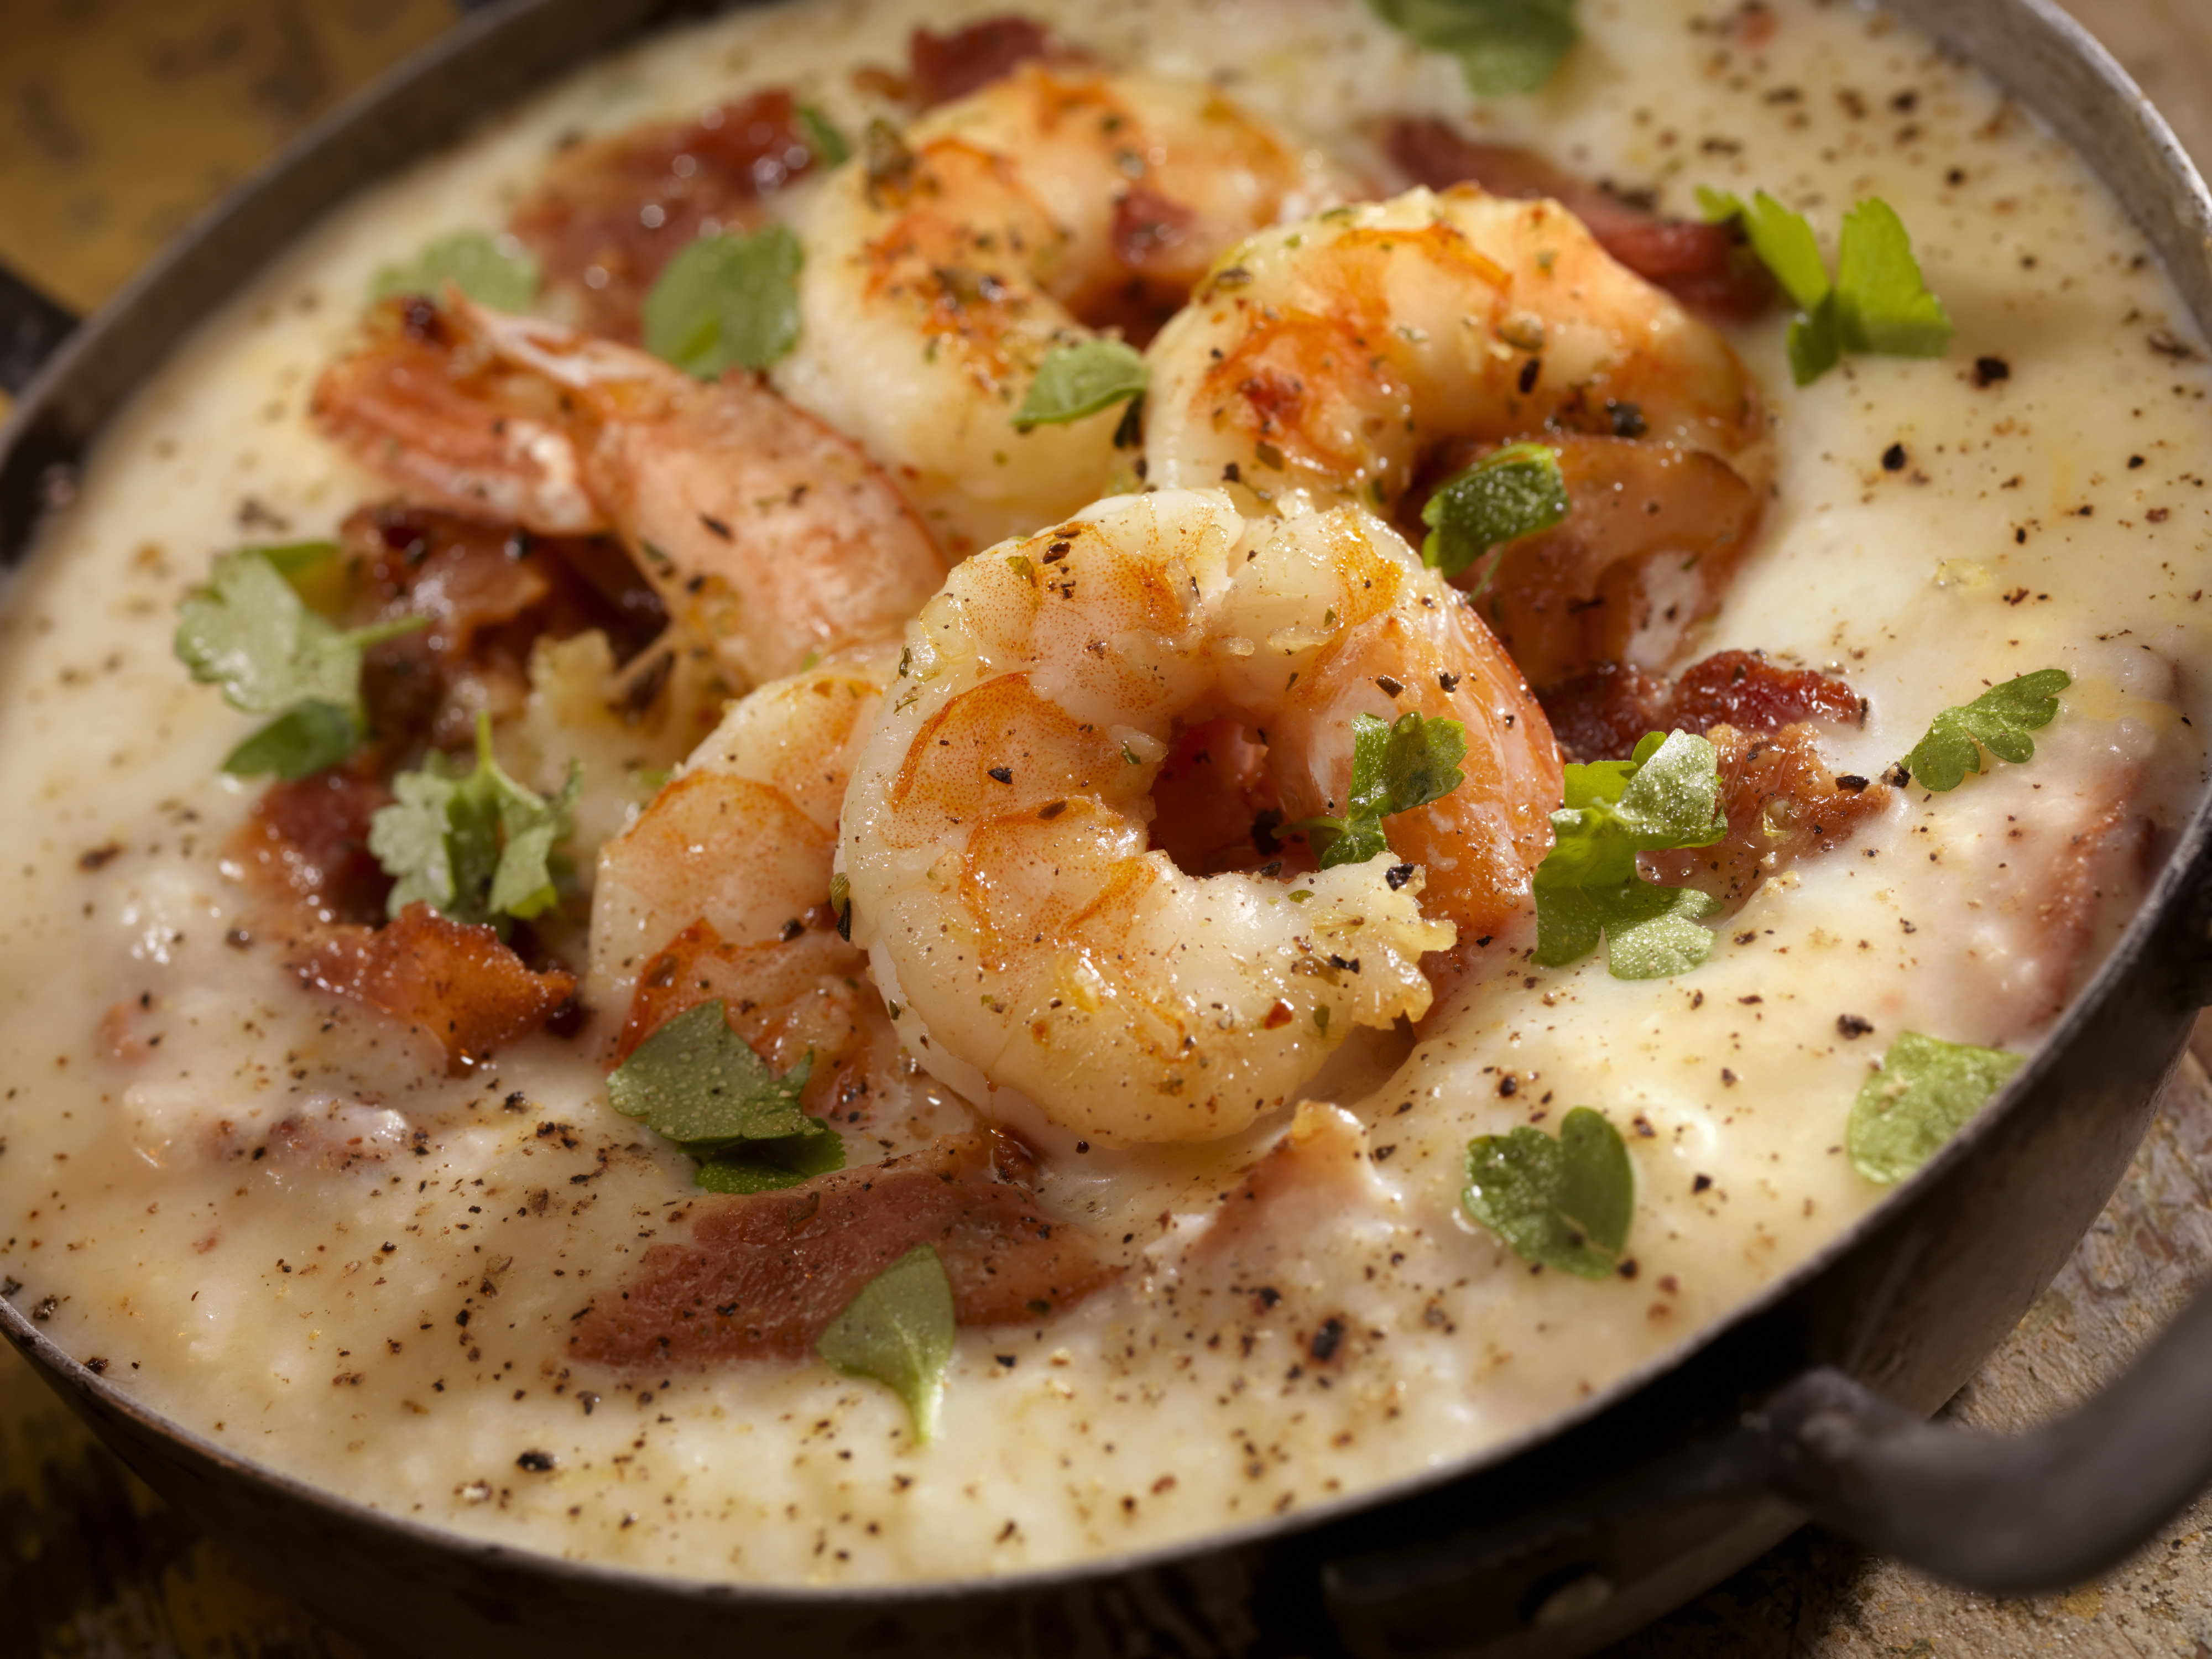 A close-up of a shrimp and grits dish, featuring plump shrimp, crispy bacon bits, and garnished with fresh herbs